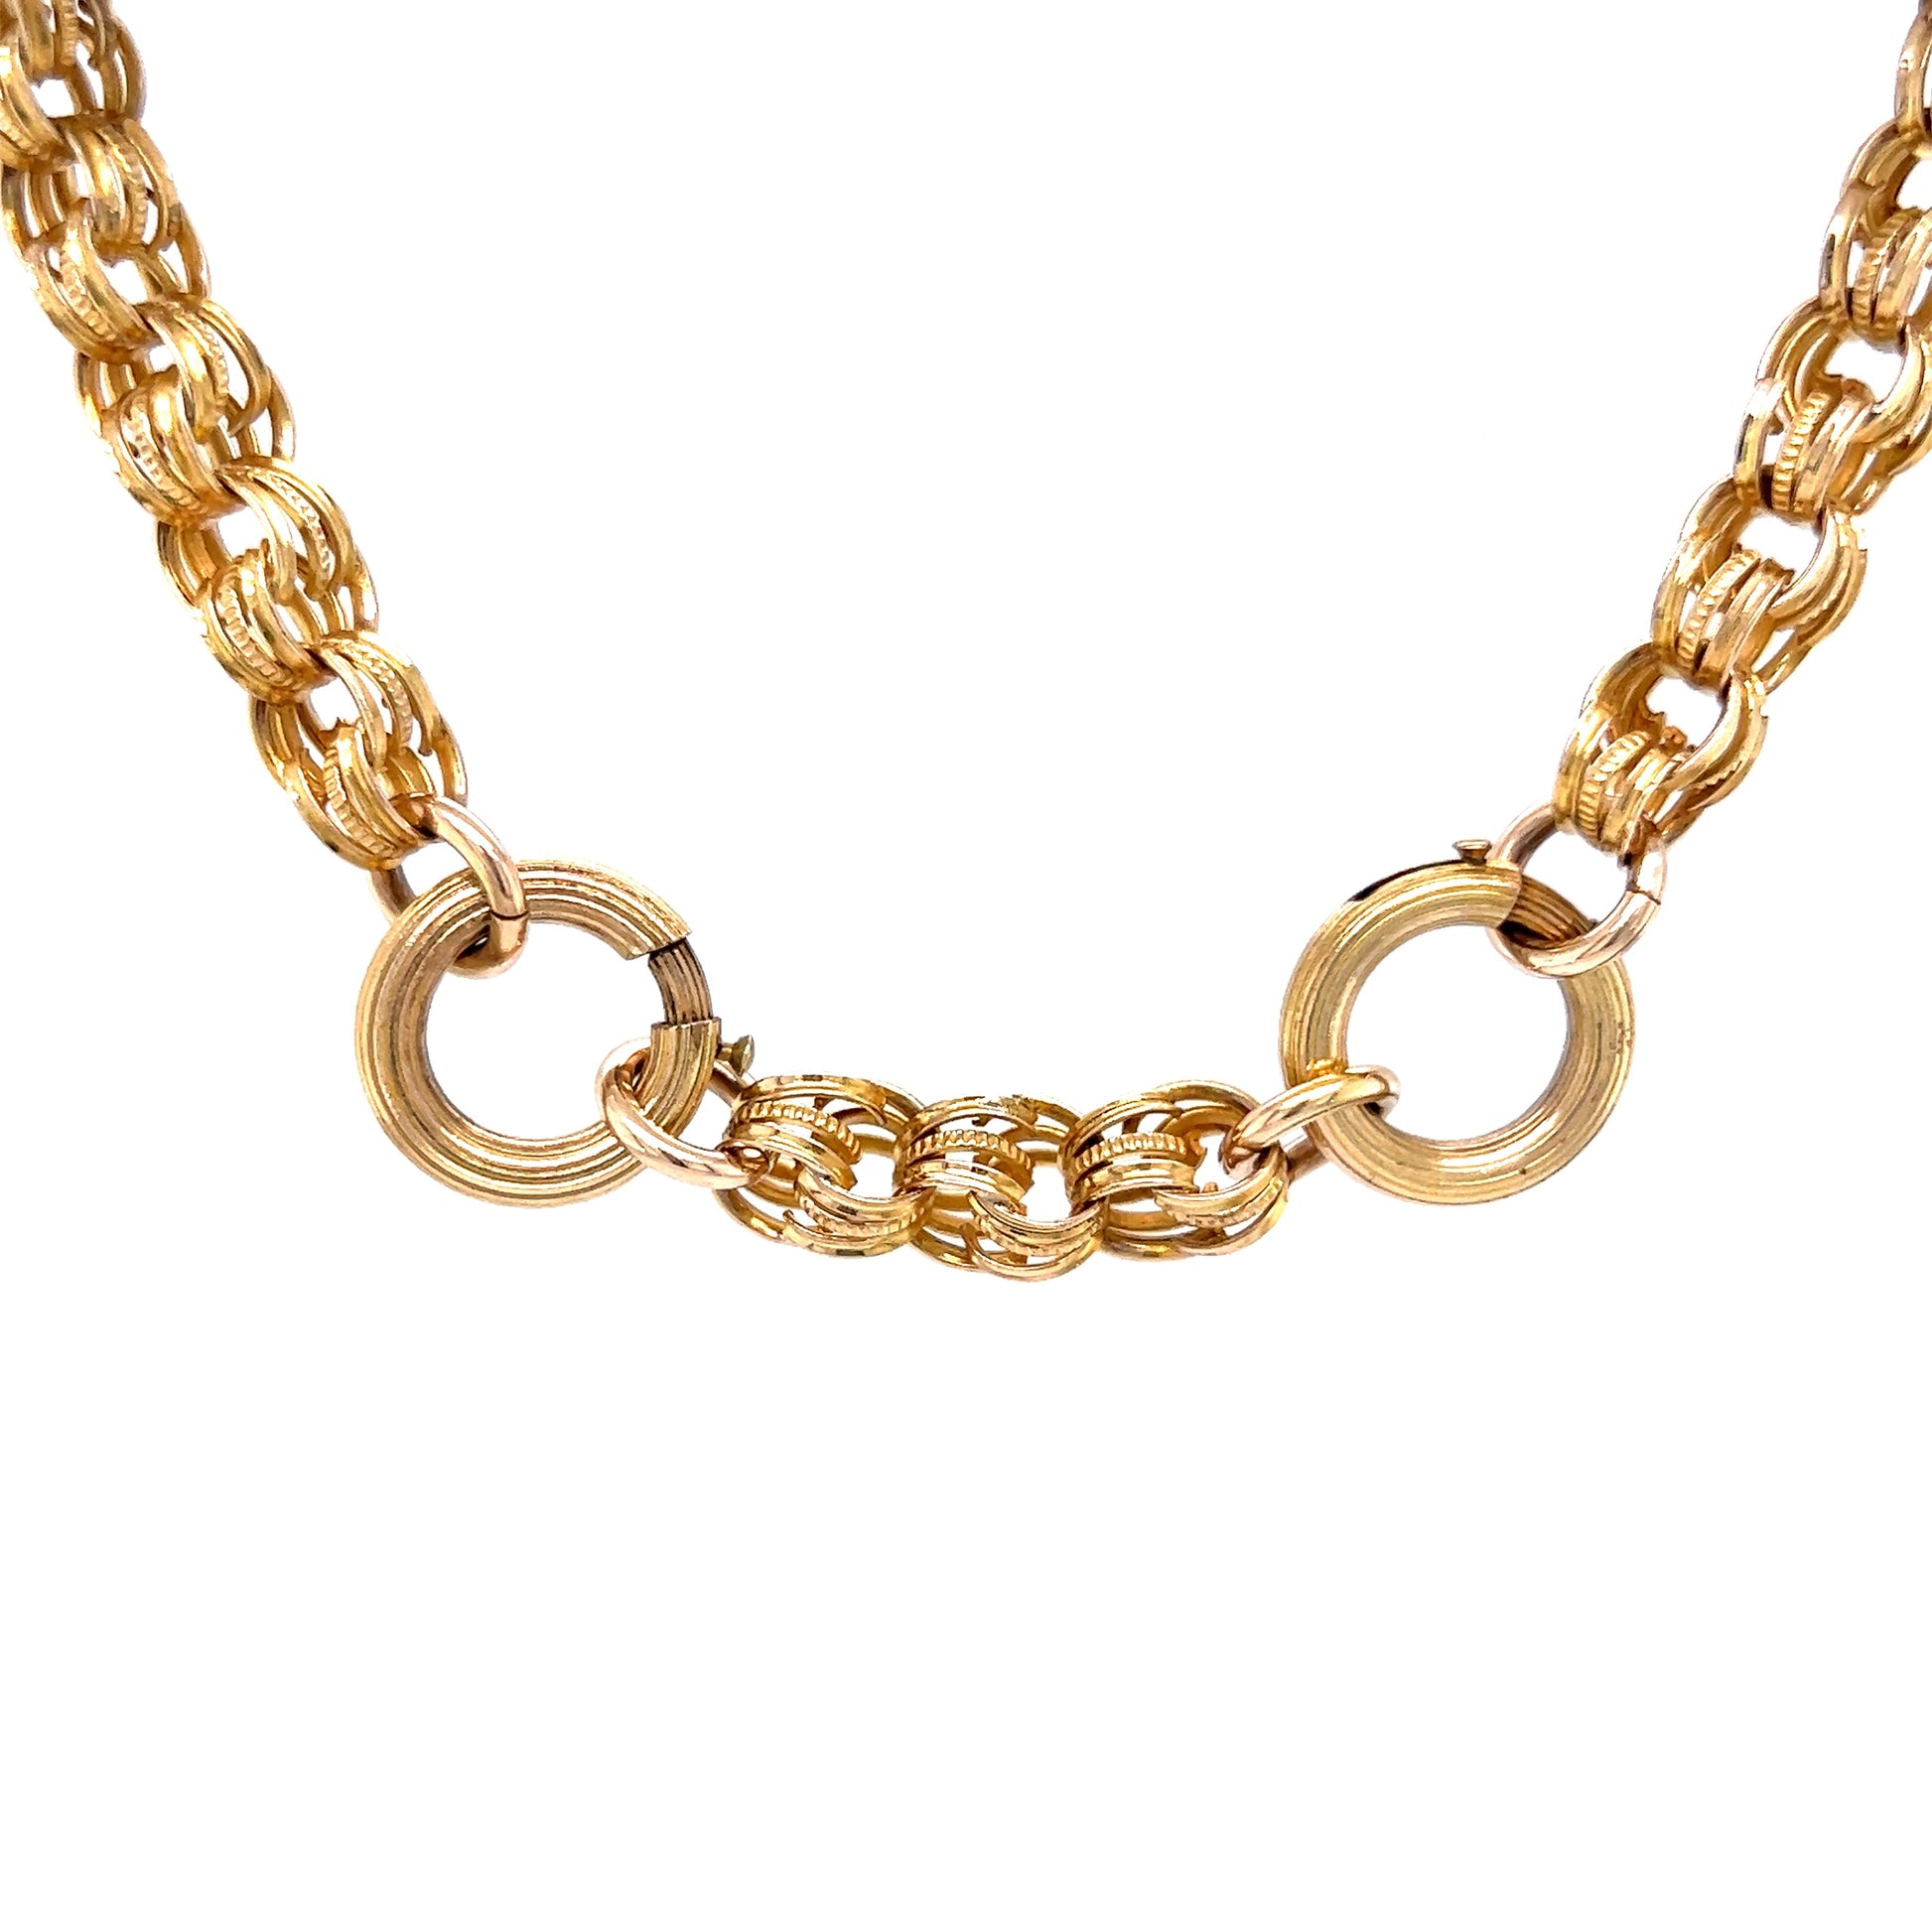 Vintage Victorian Rolo Link Chain Necklace in 9k Yellow GoldComposition: 9 Karat Yellow Gold Total Gram Weight: 30.2 g